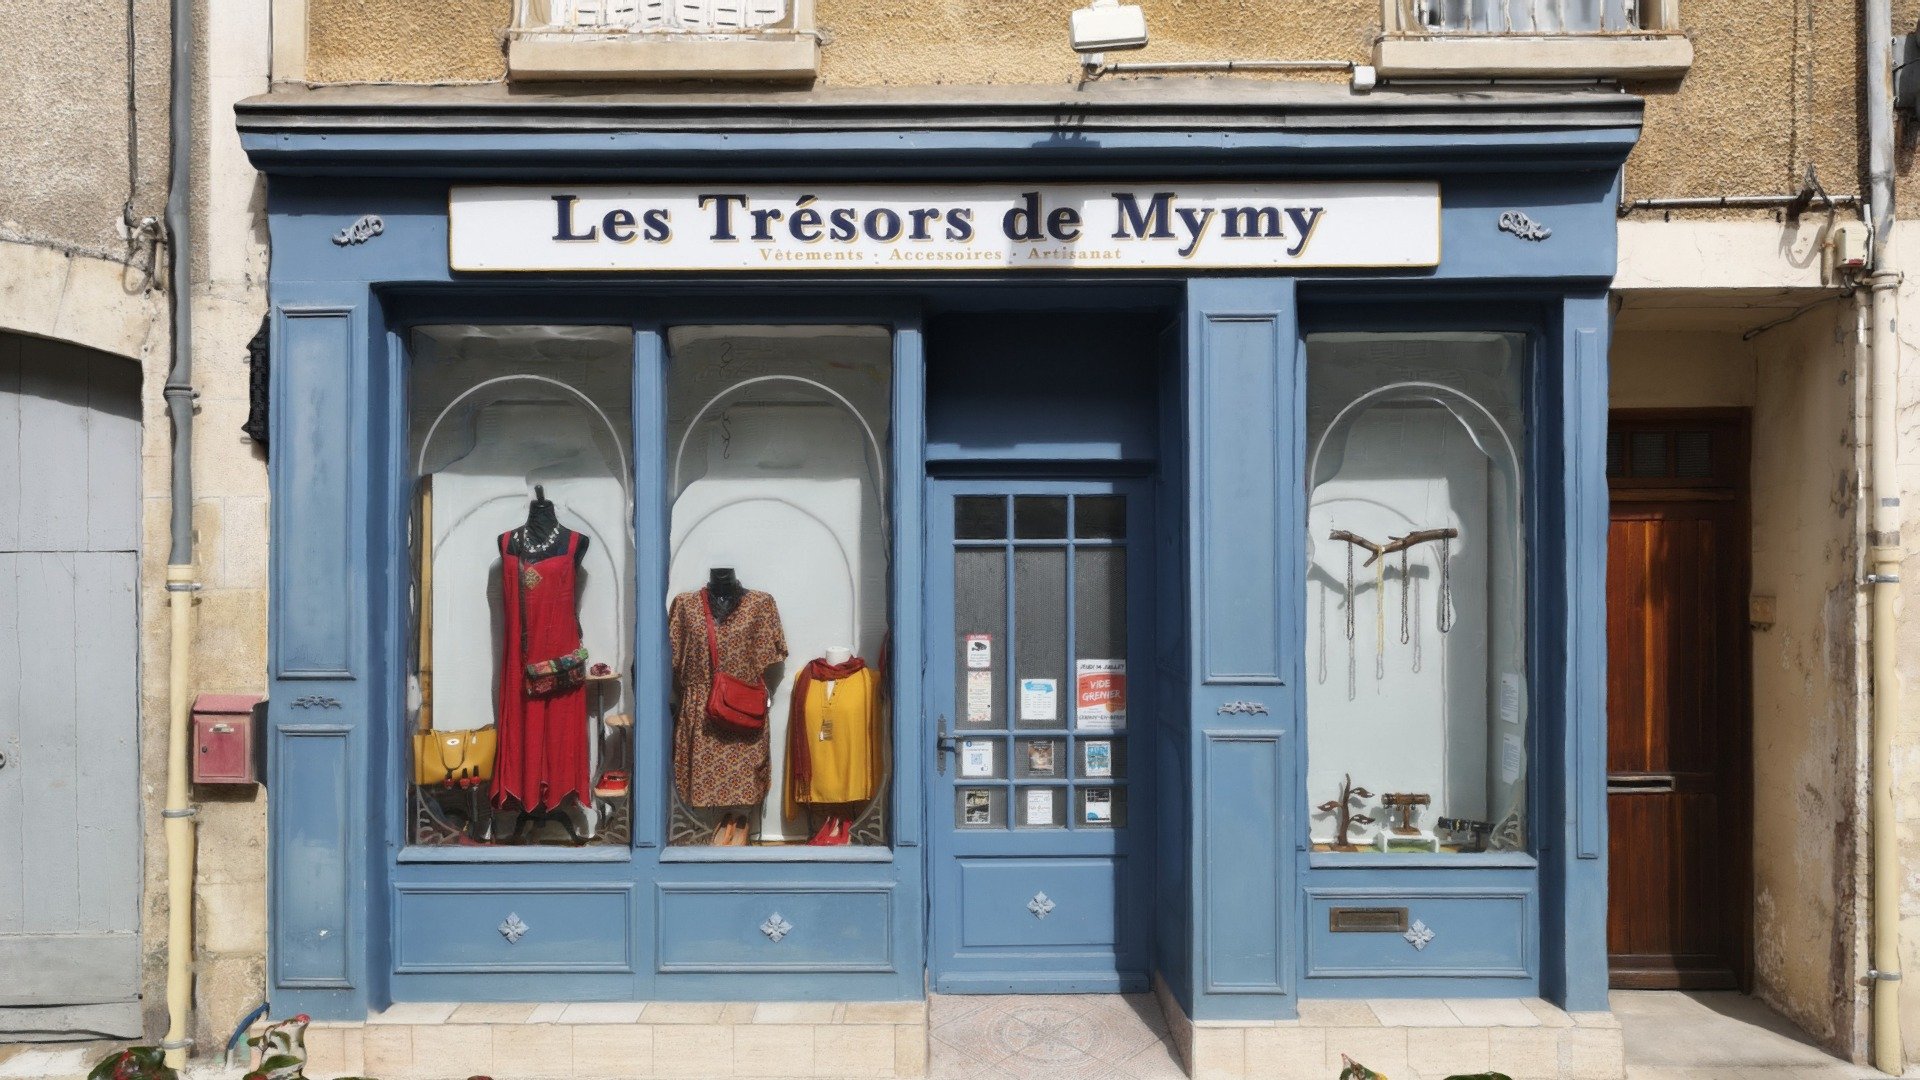 Store front of women's clothing and accessories in France - Les tresors de Mymy - 3D model by remmelfr 3d model